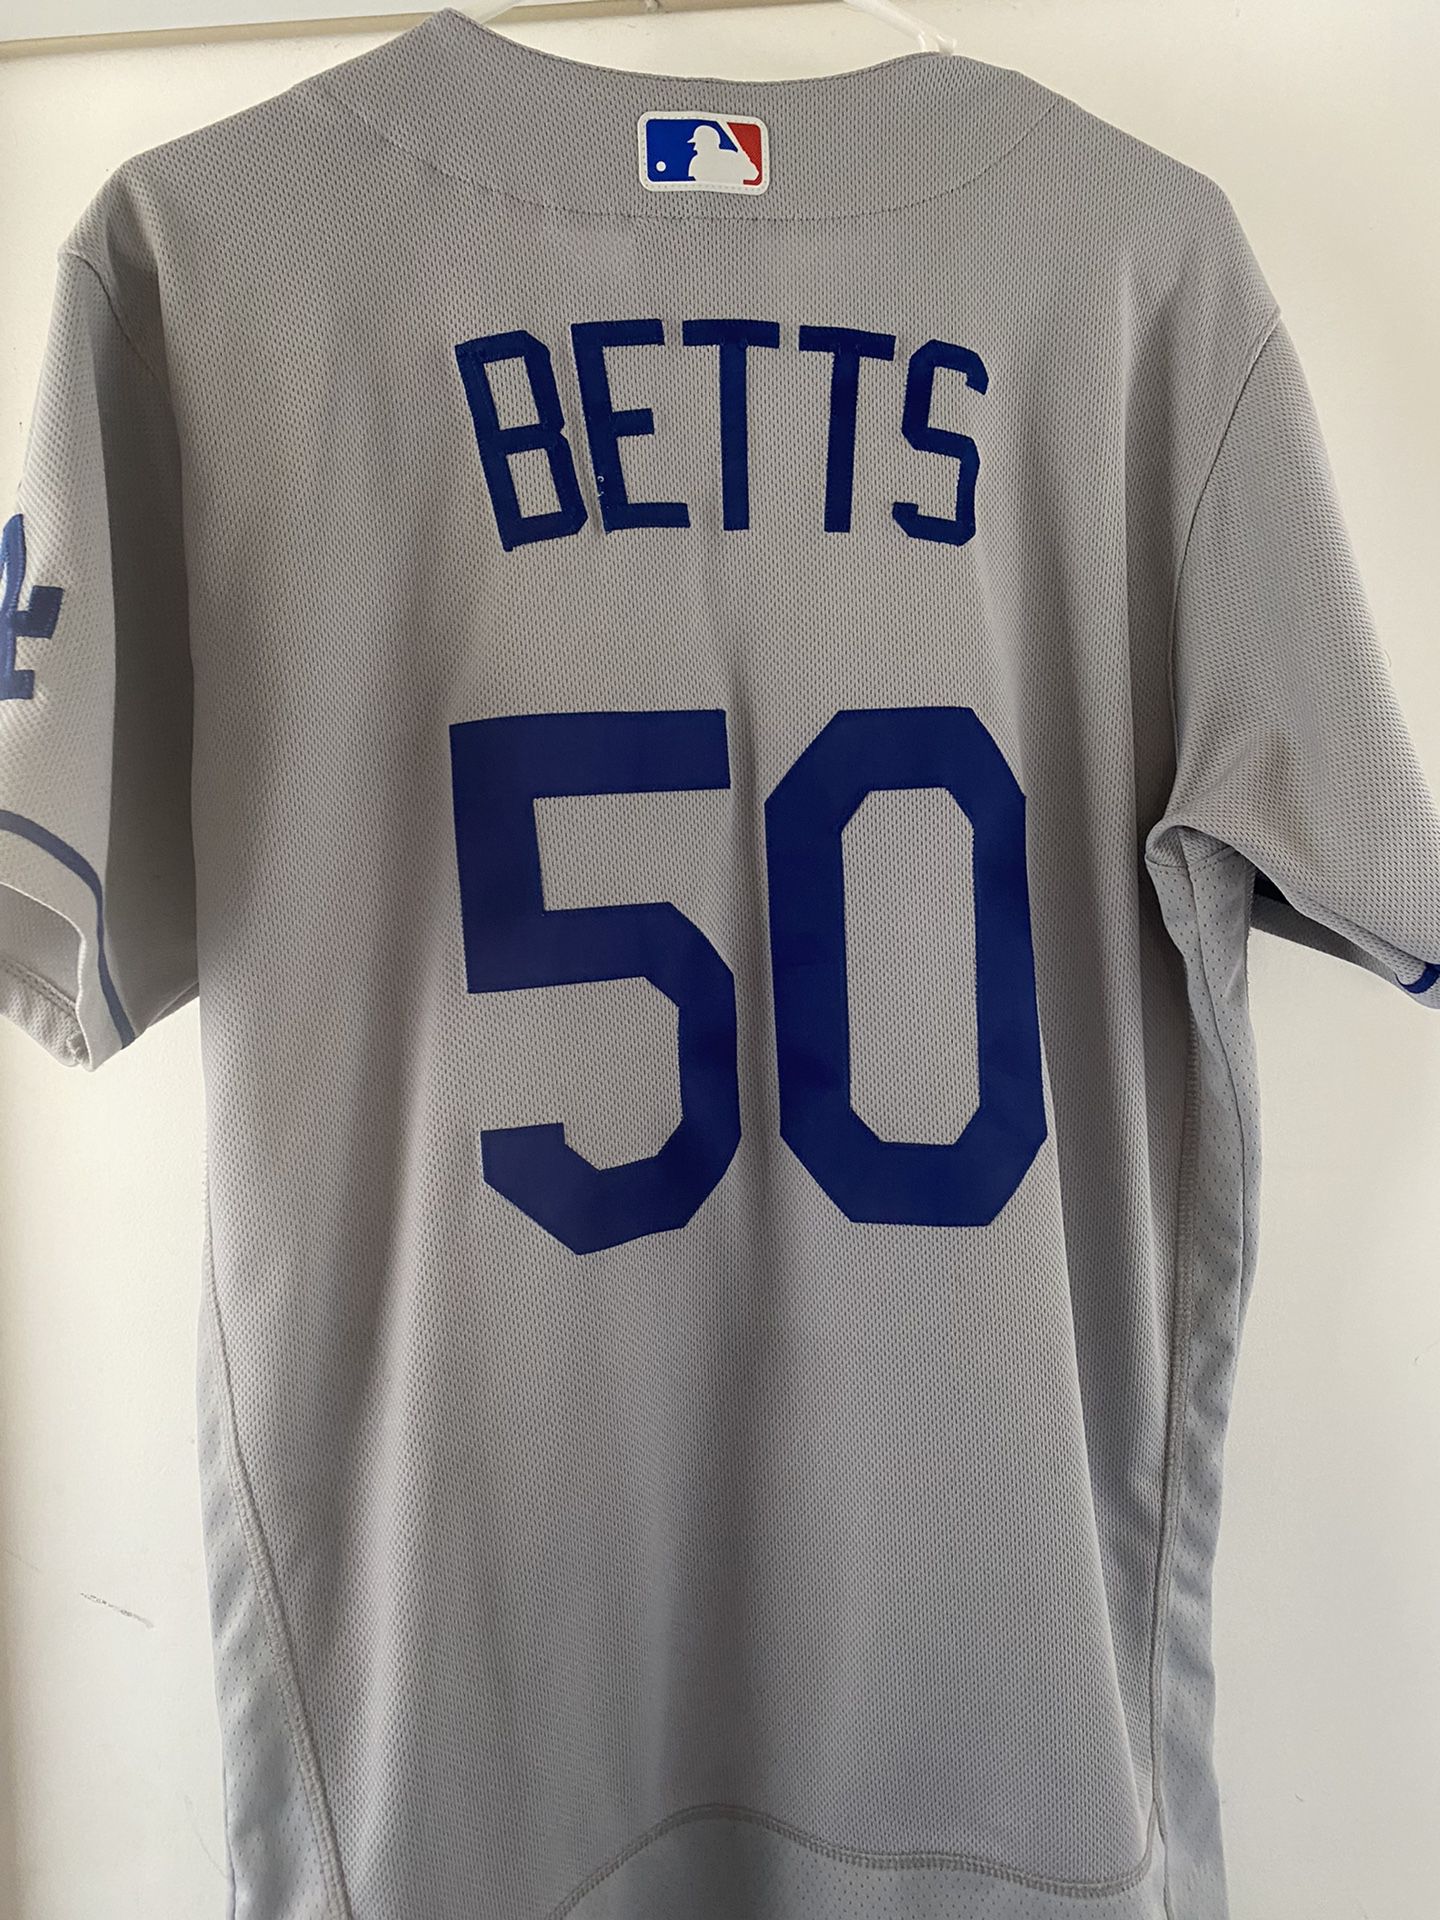 Mookie Betts Jersey Size 48 for Sale in San Diego, CA - OfferUp